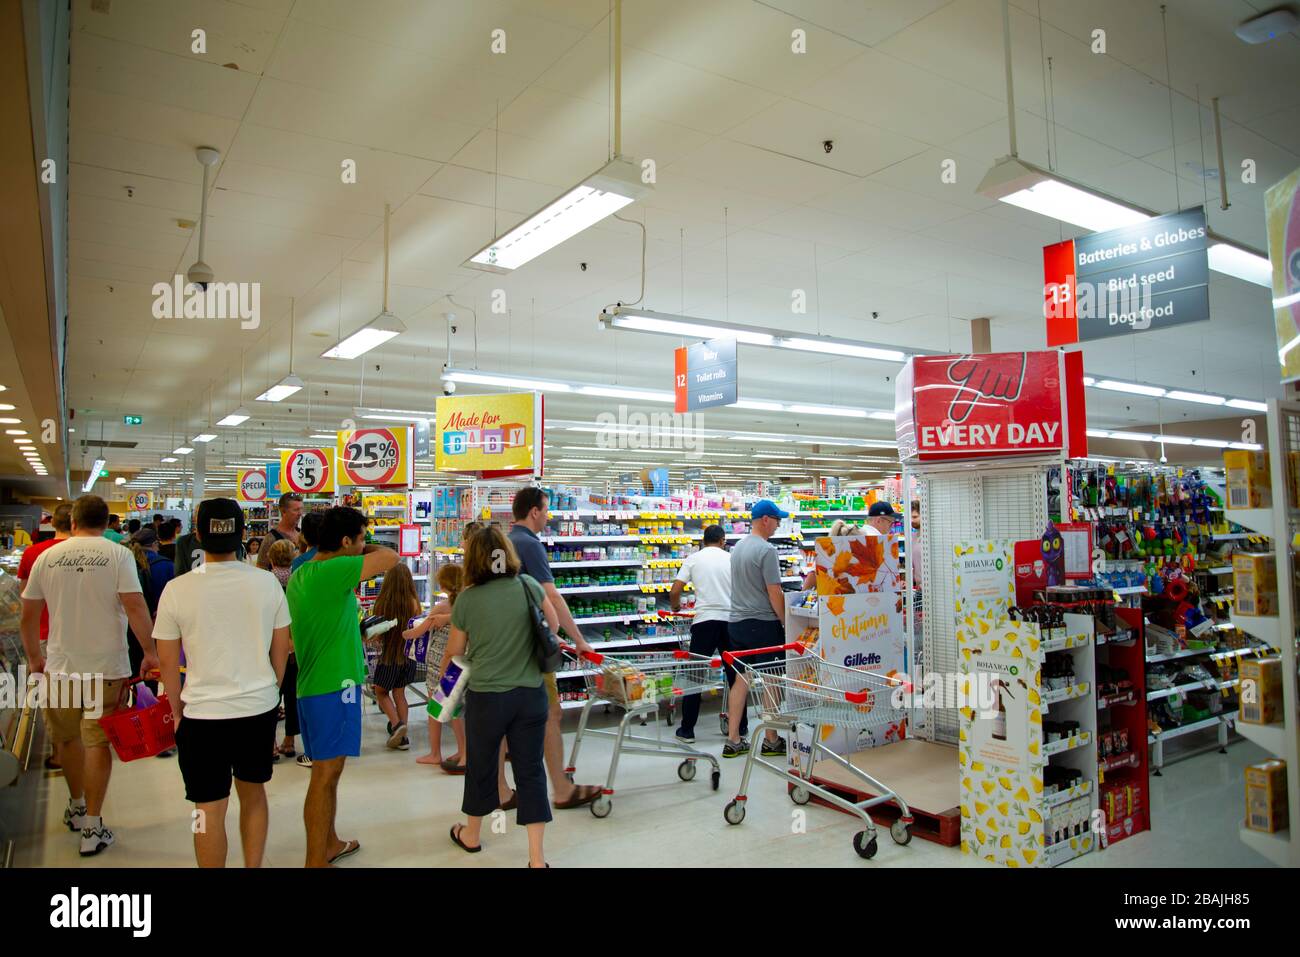 Perth, Australia - March 15, 2020: Supplies shortage at grocery store during the Coronavirus crisis Stock Photo